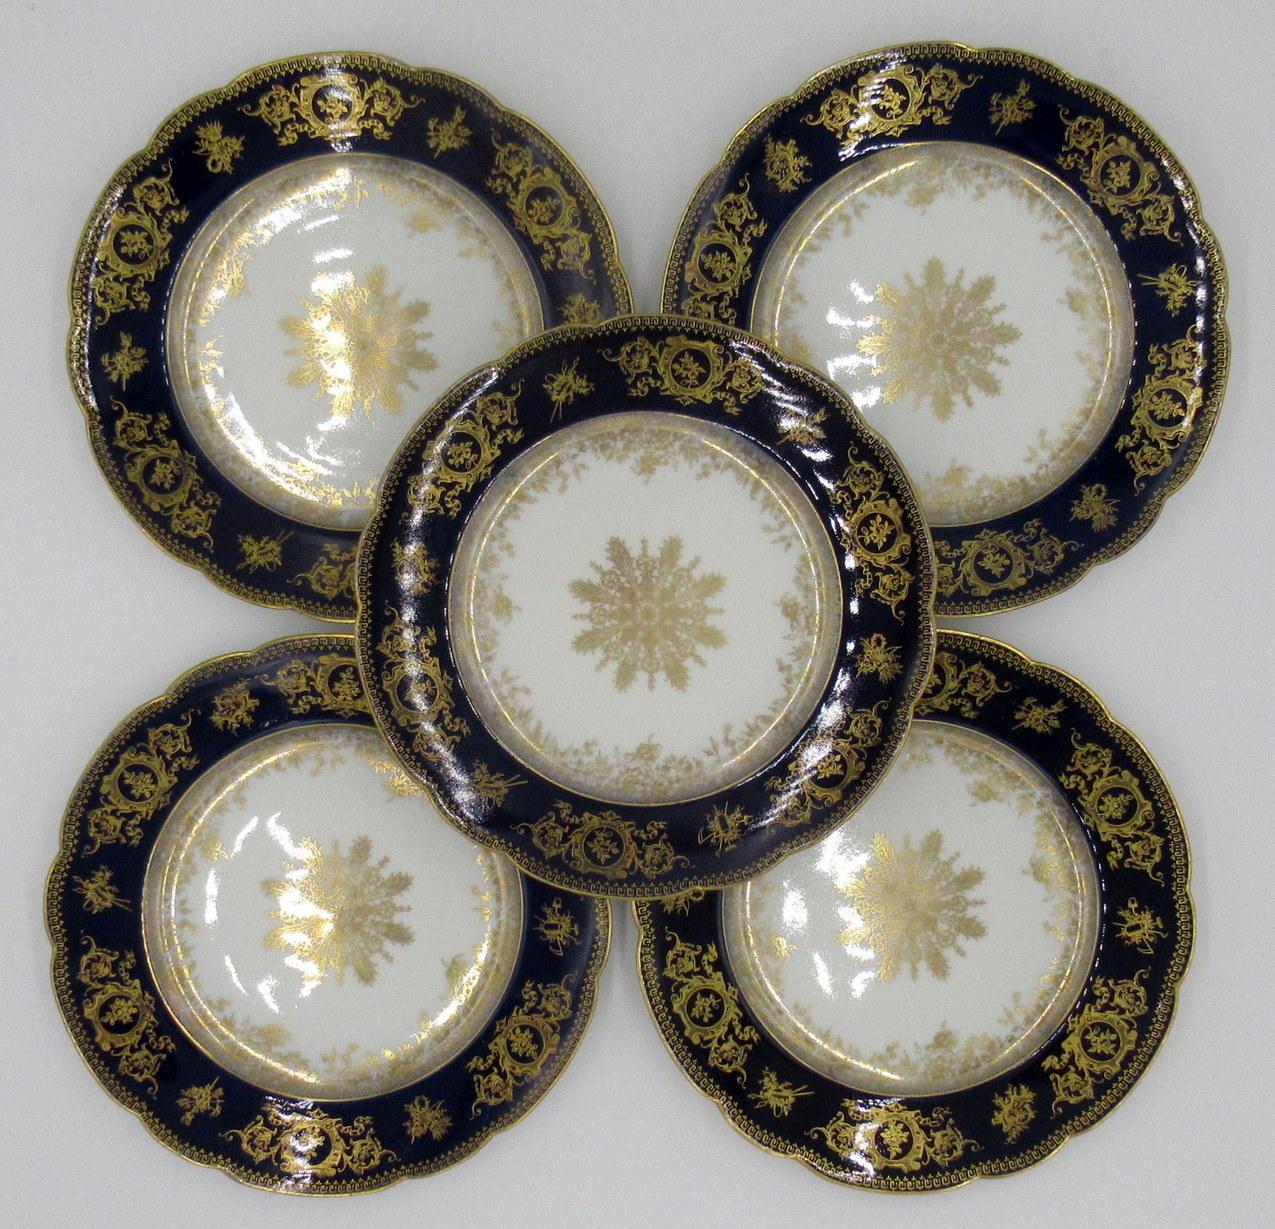 Stunning set of five identical French Porcelain Limoges Gilt cabinet plates of outstanding quality. Mid twentieth century. 

Each decorated with vignettes of framed flowers and a central snowflake detail, on a cobalt blue and white ground.